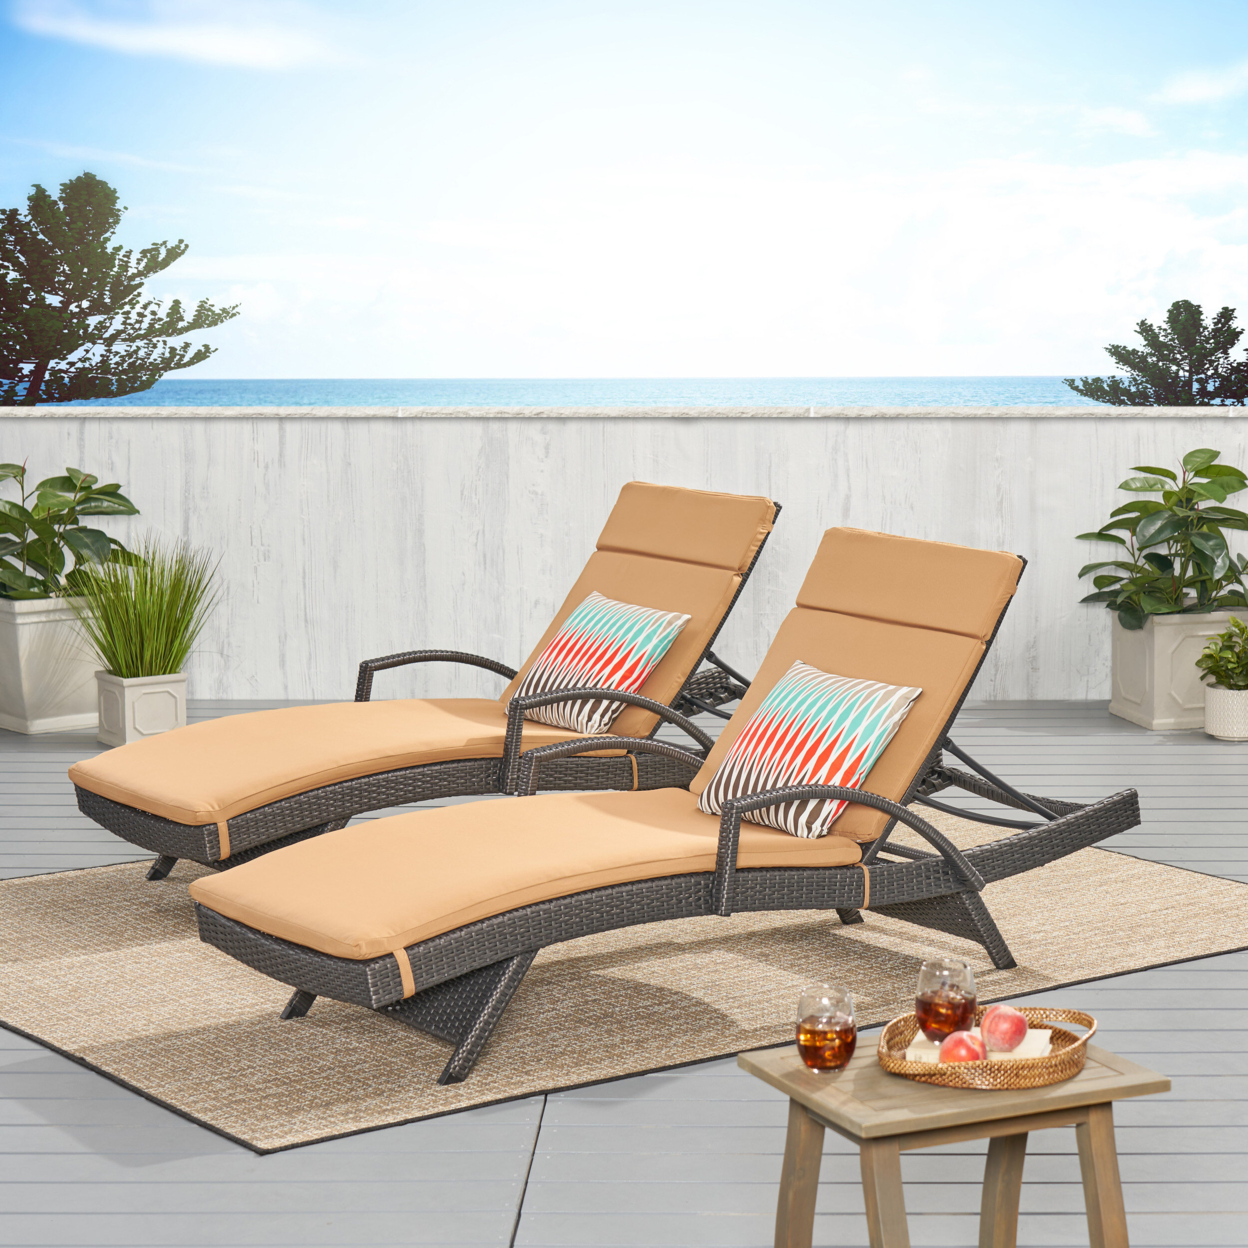 Soleil Outdoor Wicker Chaise Lounges With Water Resistant Cushions (Set Of 2) - Caramel